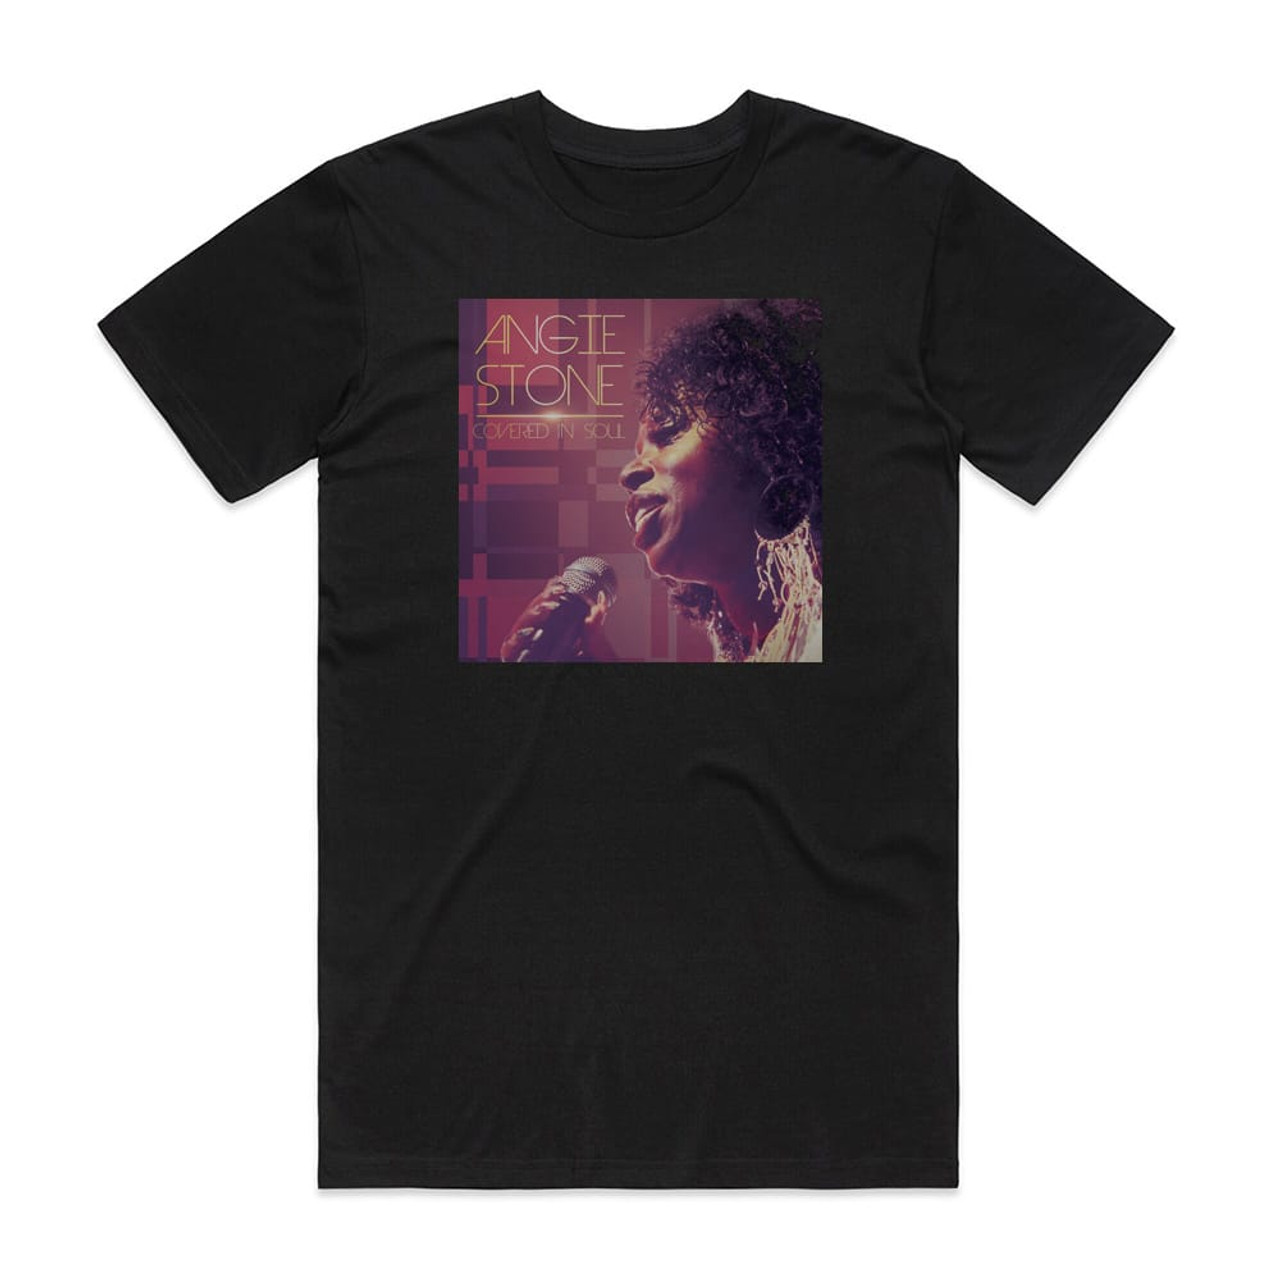 Angie Stone Covered In Soul Album Cover T-Shirt Black